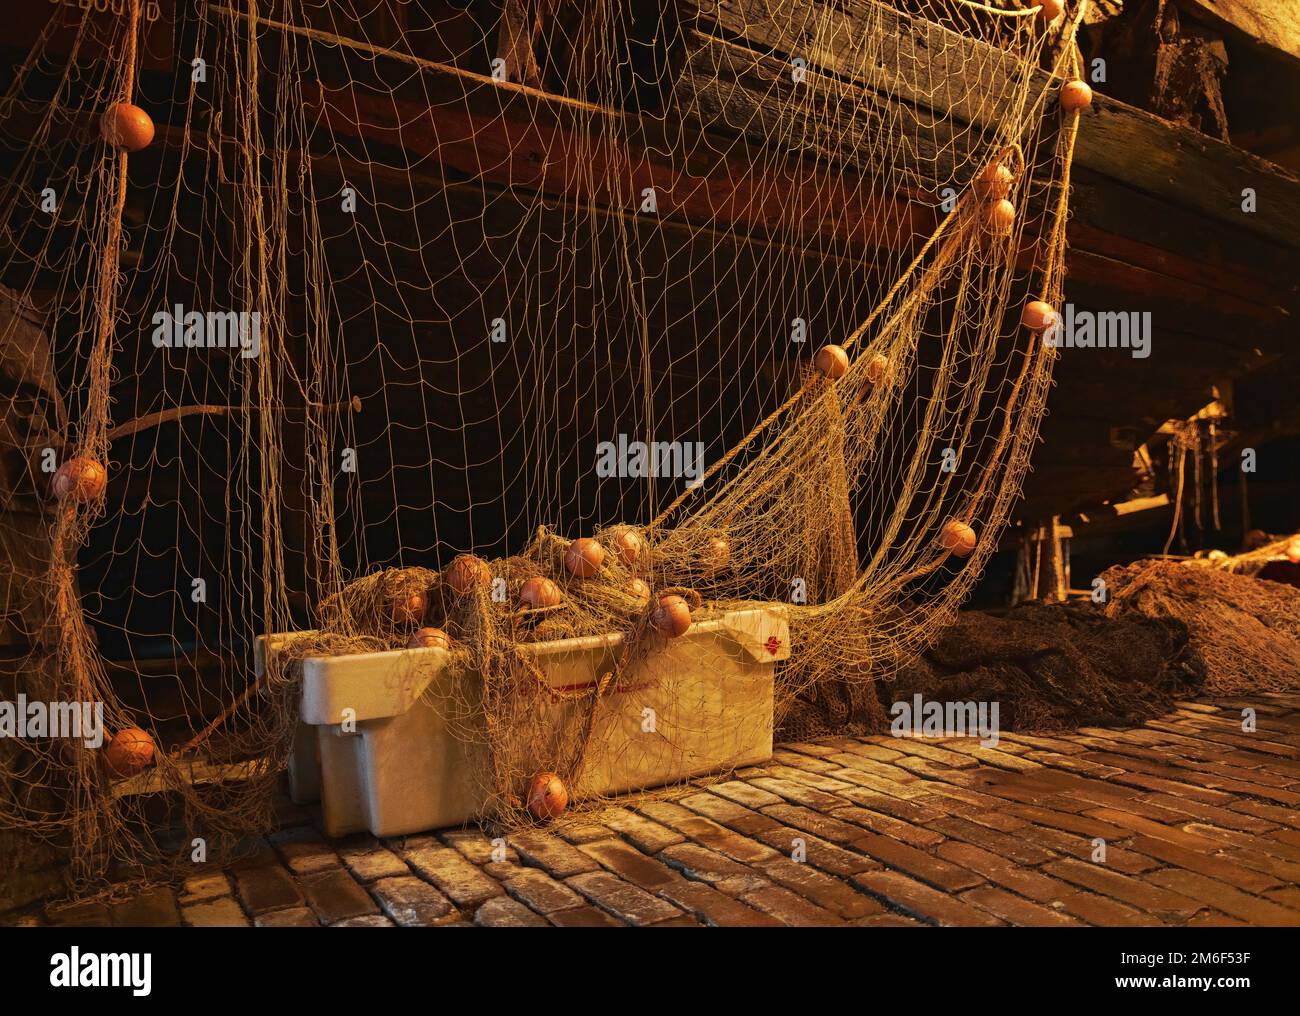 https://c8.alamy.com/comp/2M6F53F/fishing-nets-with-floats-for-a-wooden-ship-2M6F53F.jpg